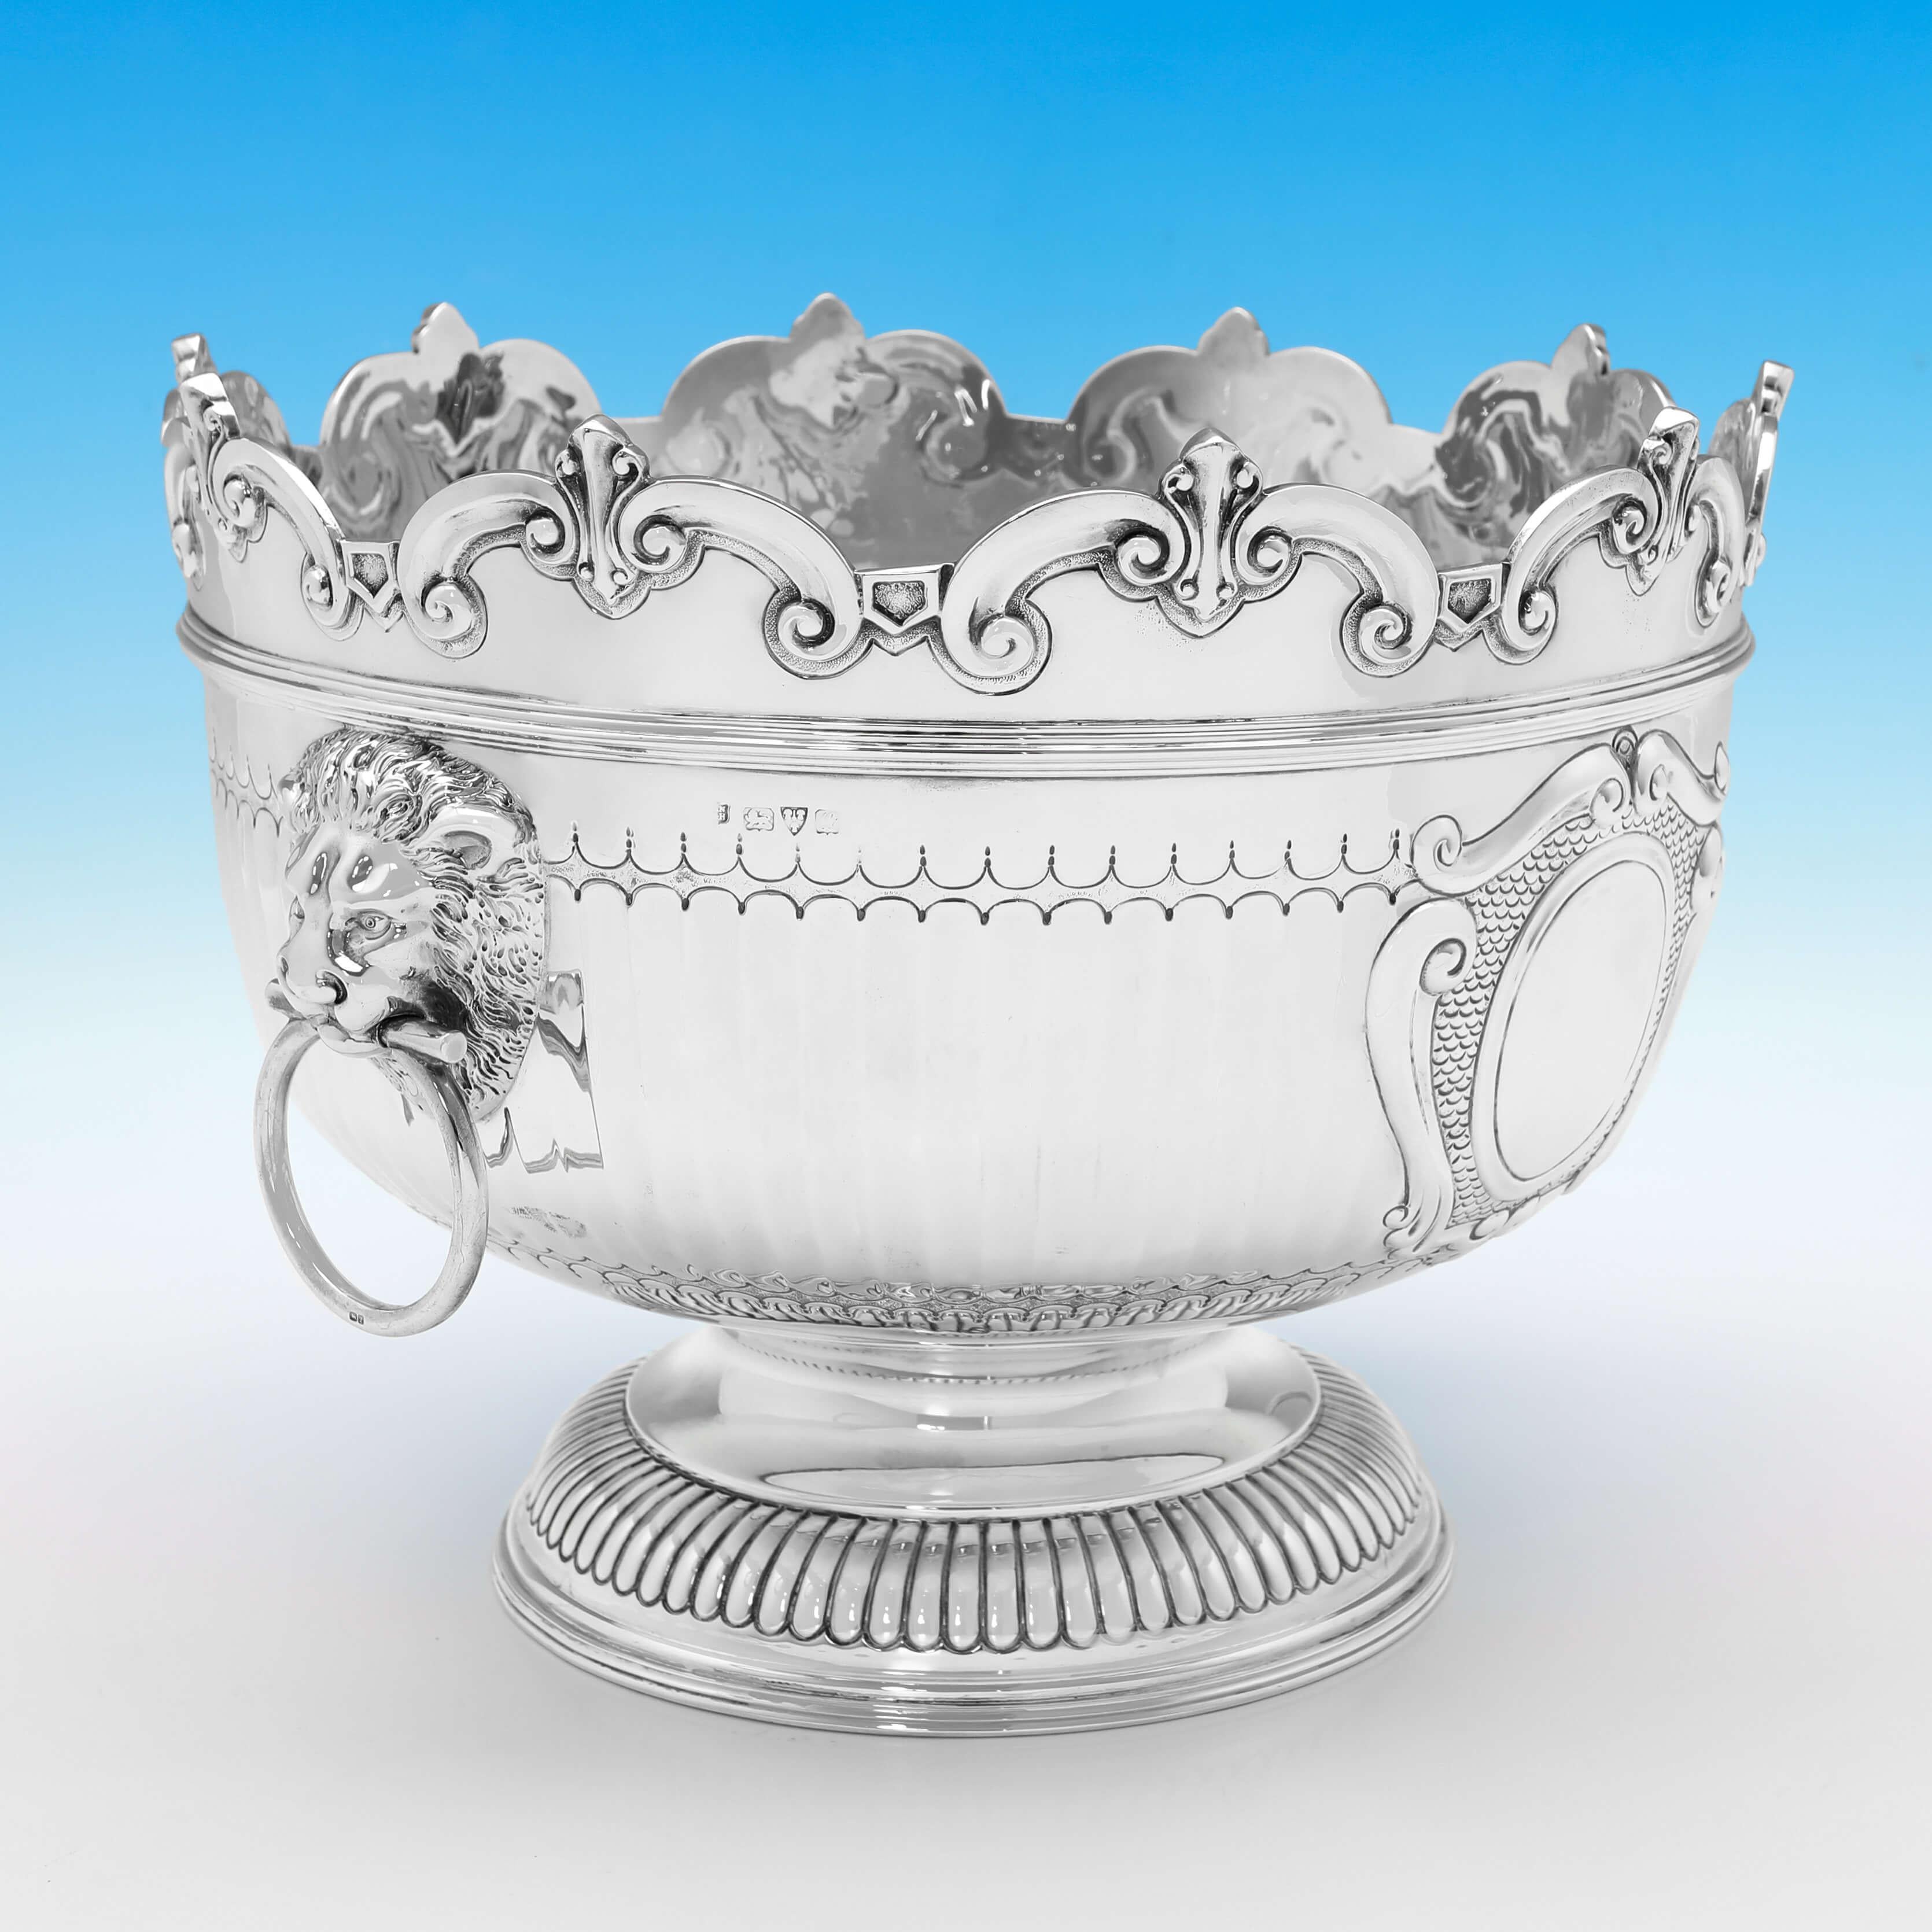 Hallmarked in Chester in 1911 by Nathan & Hayes, this attractive, Antique Sterling Silver Bowl, is in the Montieth style, with a shaped and scalloped rim, drop ring lion mask handles, and flat chasing to the body. 

The bowl measures 9.5